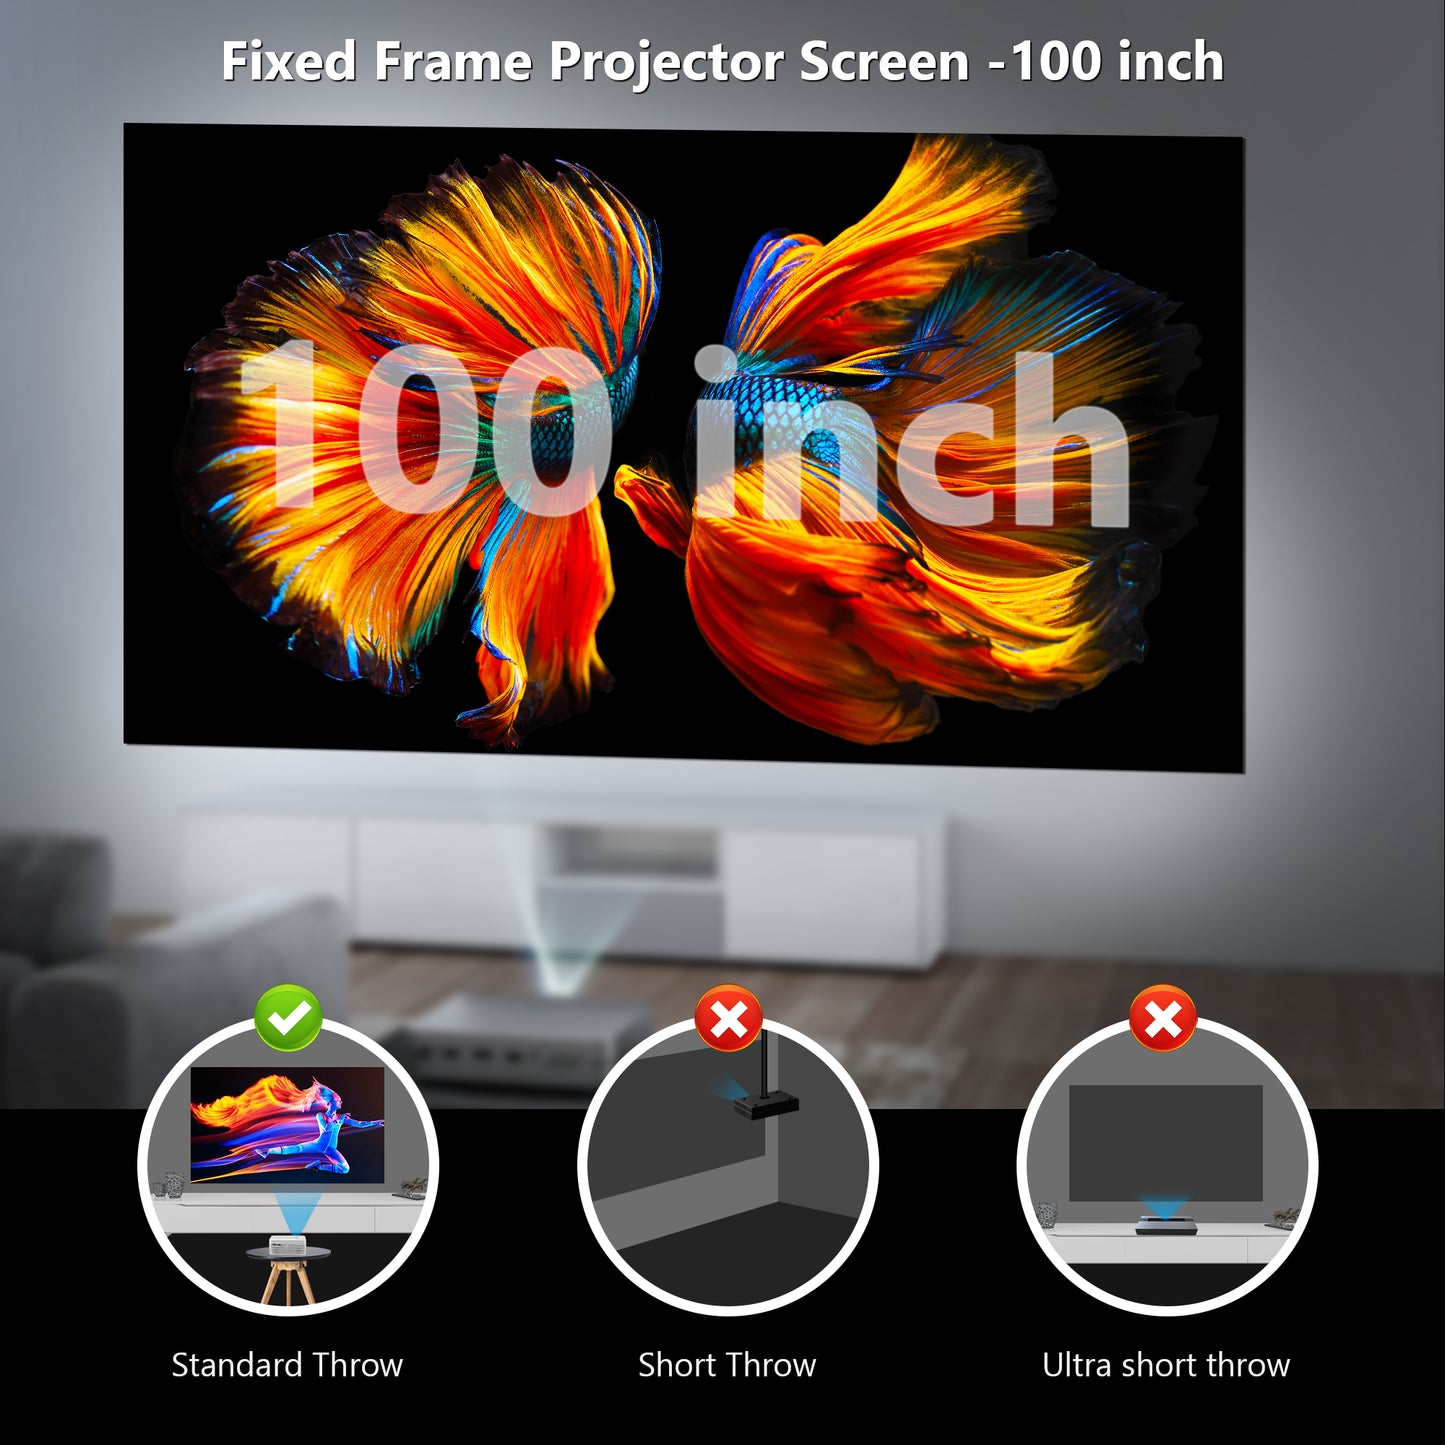 FANGOR Projector Screen, 100" Edge Free Ambient Light Rejecting(ALR) Screen for Projectors, 16:9 4K UHD Anti-Crease Indoor Screen ,1.5Gain, 178° Viewing Angle, Perfect for Home , Office and Classroom